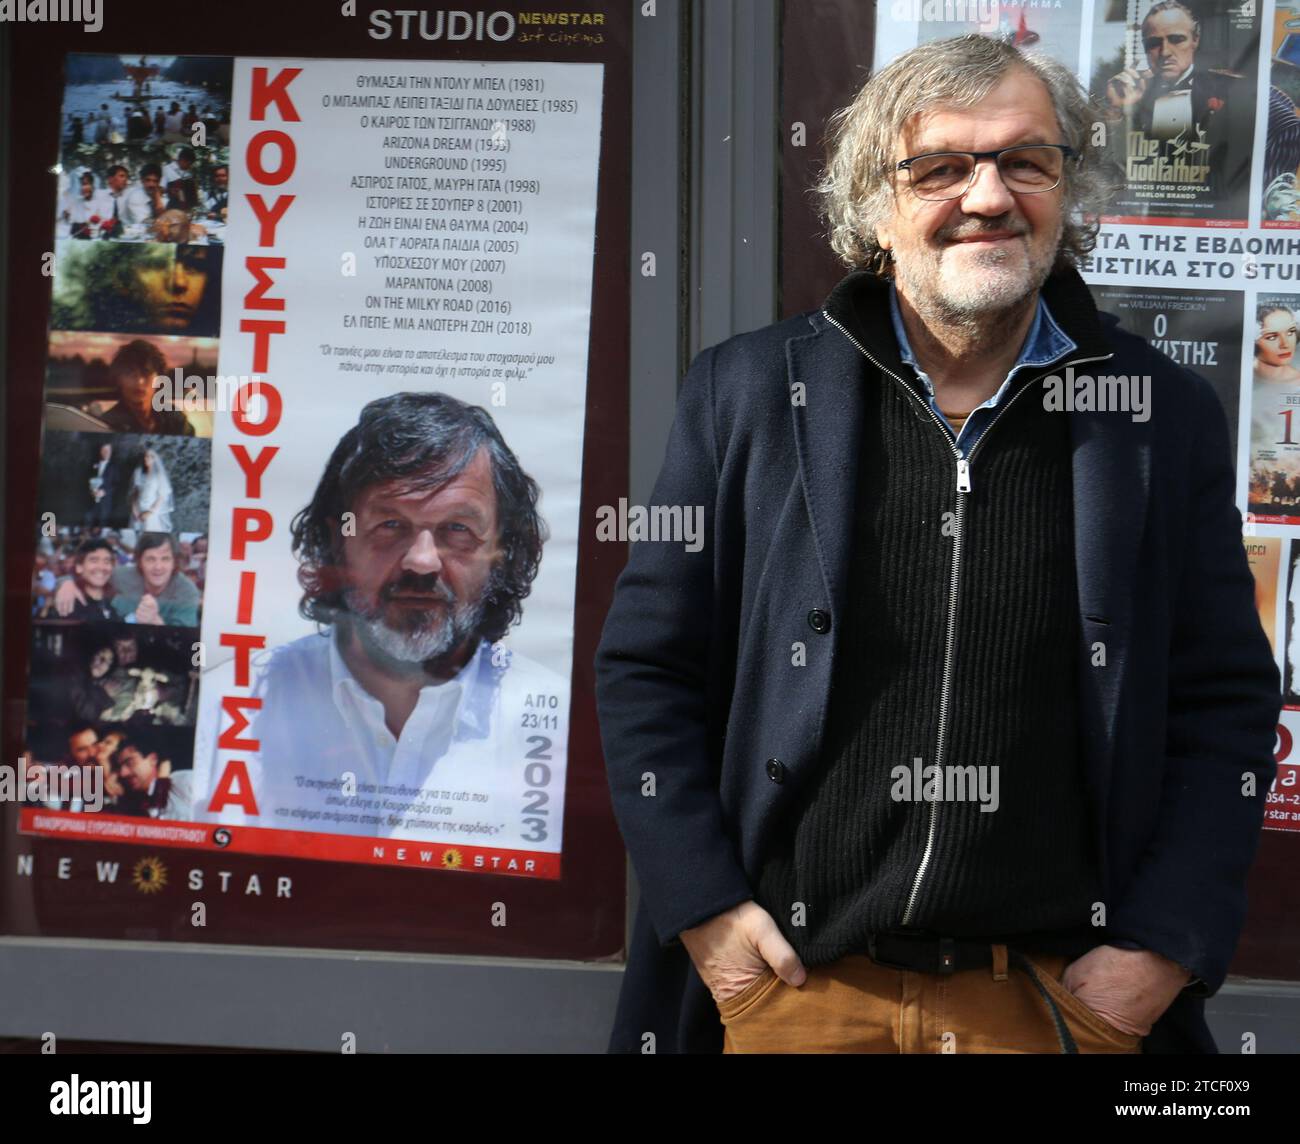 Director EMIR KUSTURICA arrive for the press conference. Serbian director Emir Kusturica, who will be in Athens from November 23 to 26 to participate in the pre-festival retrospective in which all his films will be screened, including “Arizona Dream”, “Underground”, “Dad is Away on a business trip” Stock Photo